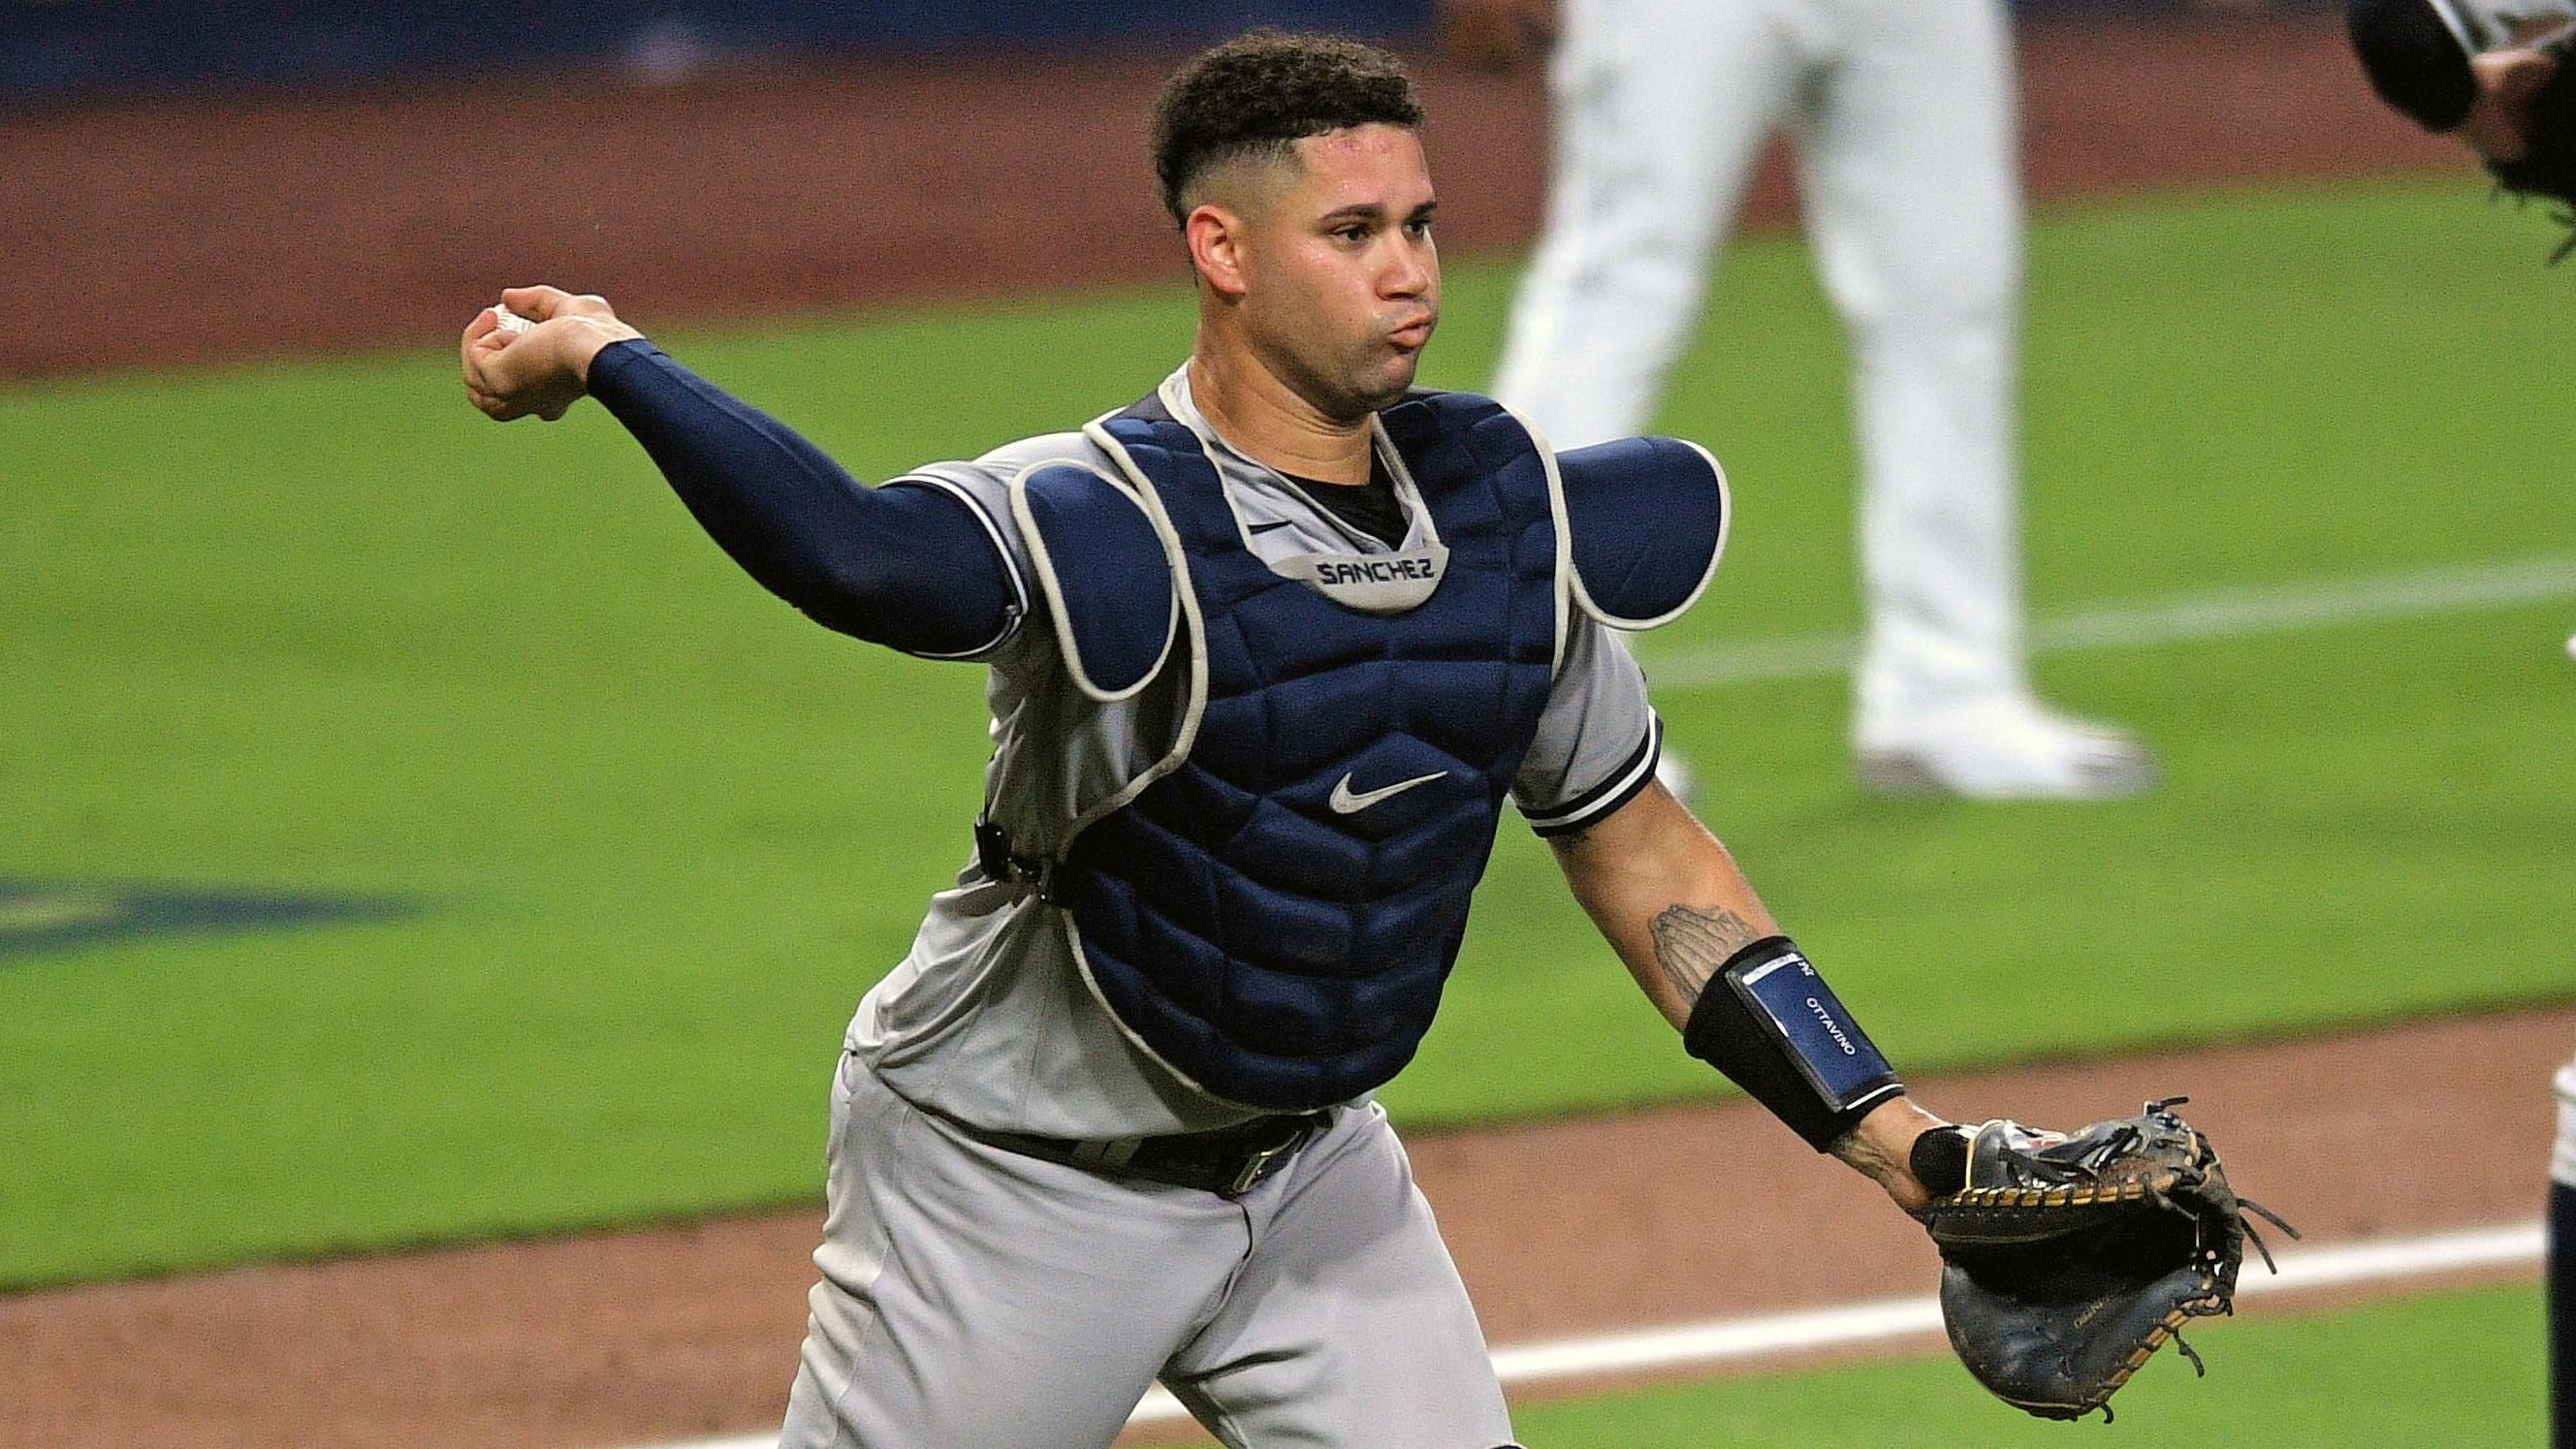 Oct 6, 2020; San Diego, California, USA; New York Yankees catcher Gary Sanchez (24) throws out Tampa Bay Rays shortstop Willy Adames (1, not pictured) in the 5th inning during game two of the 2020 ALDS at Petco Park. Mandatory Credit: Orlando Ramirez-USA TODAY Sports / © Orlando Ramirez-USA TODAY Sports